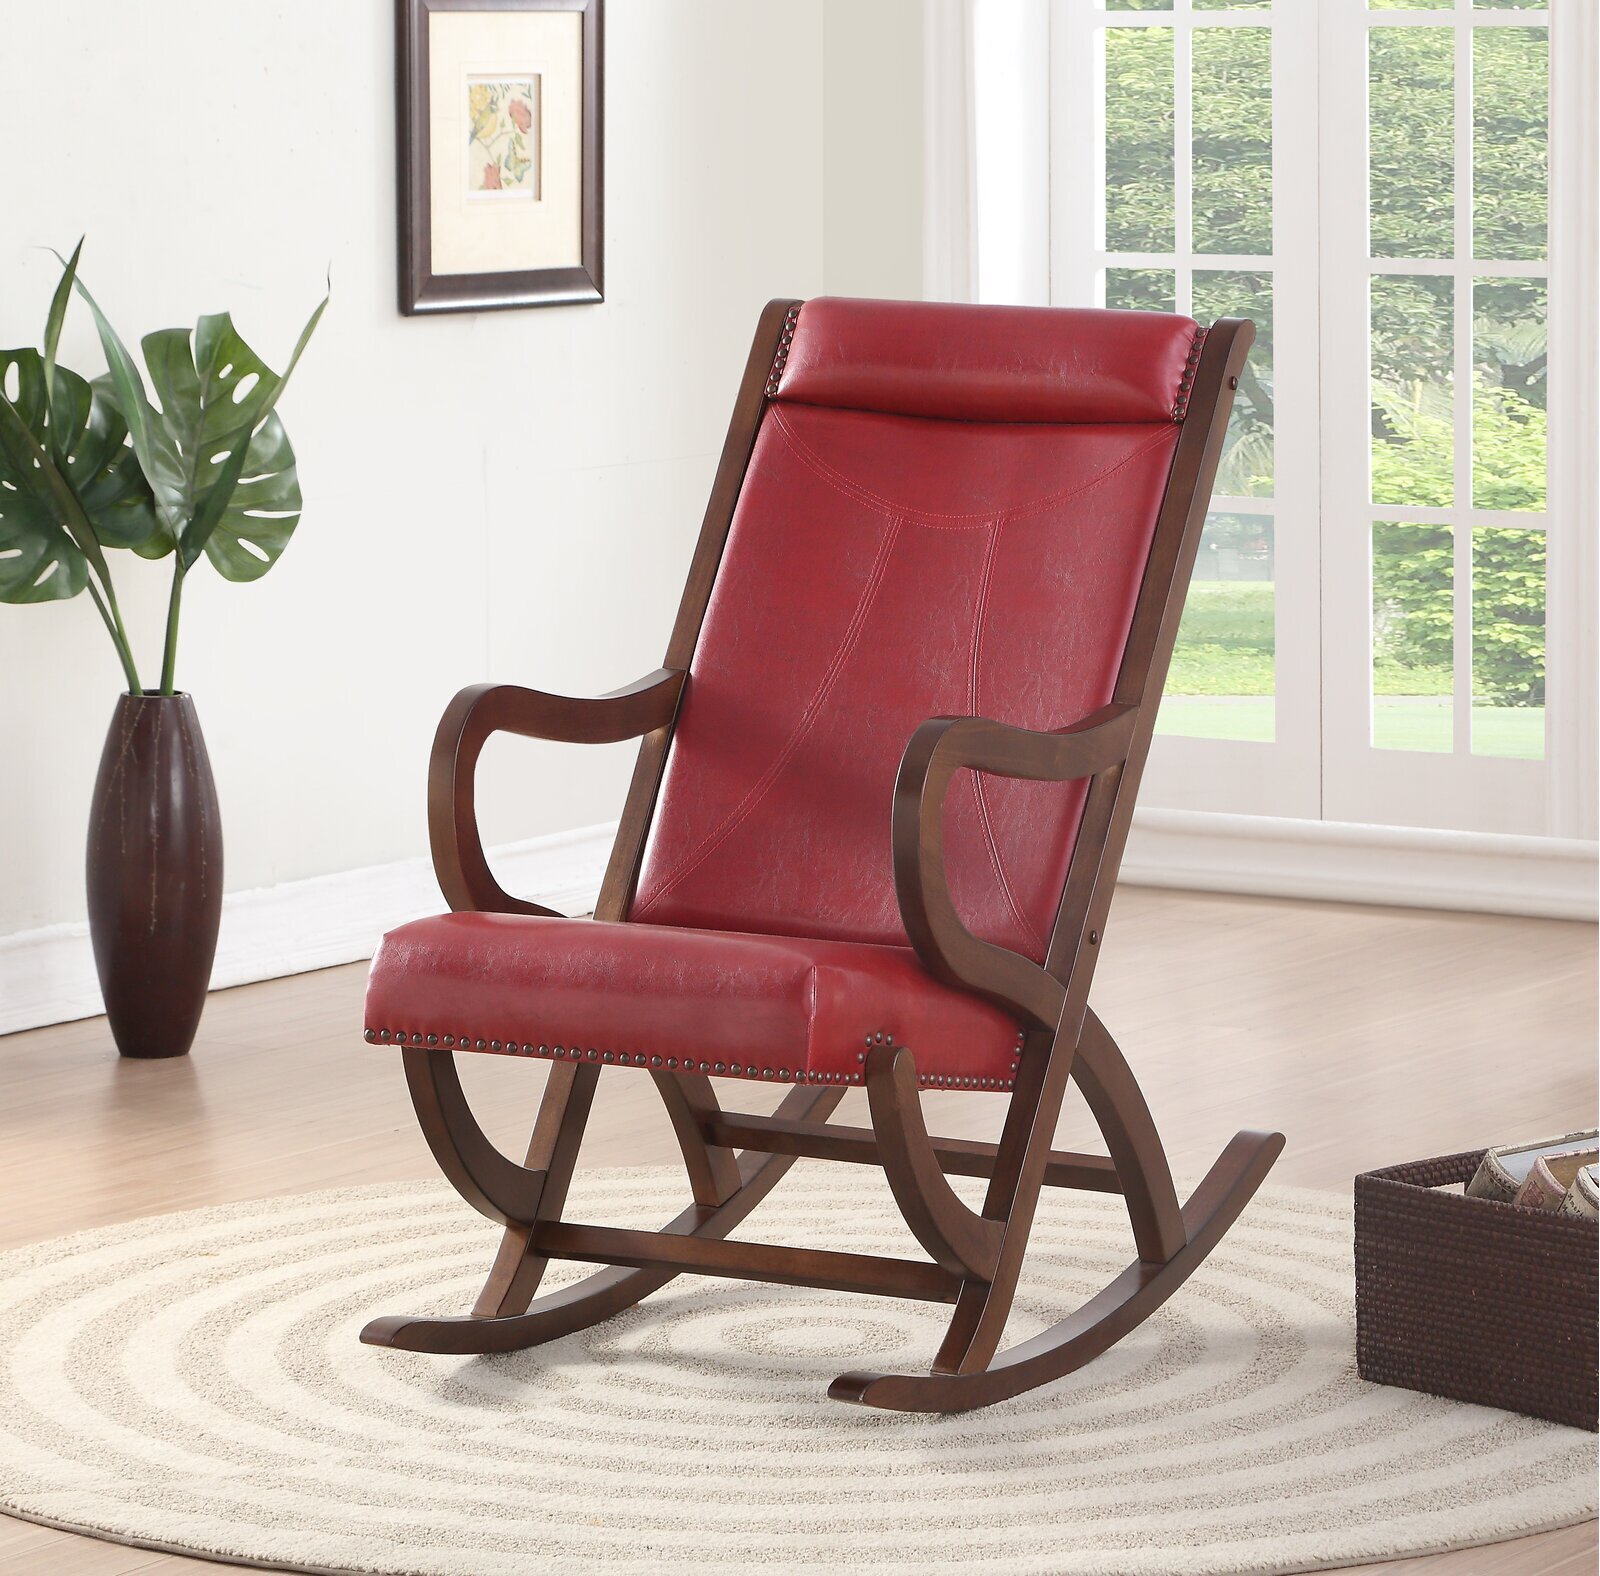 Leather Western Rocking Chair Styles